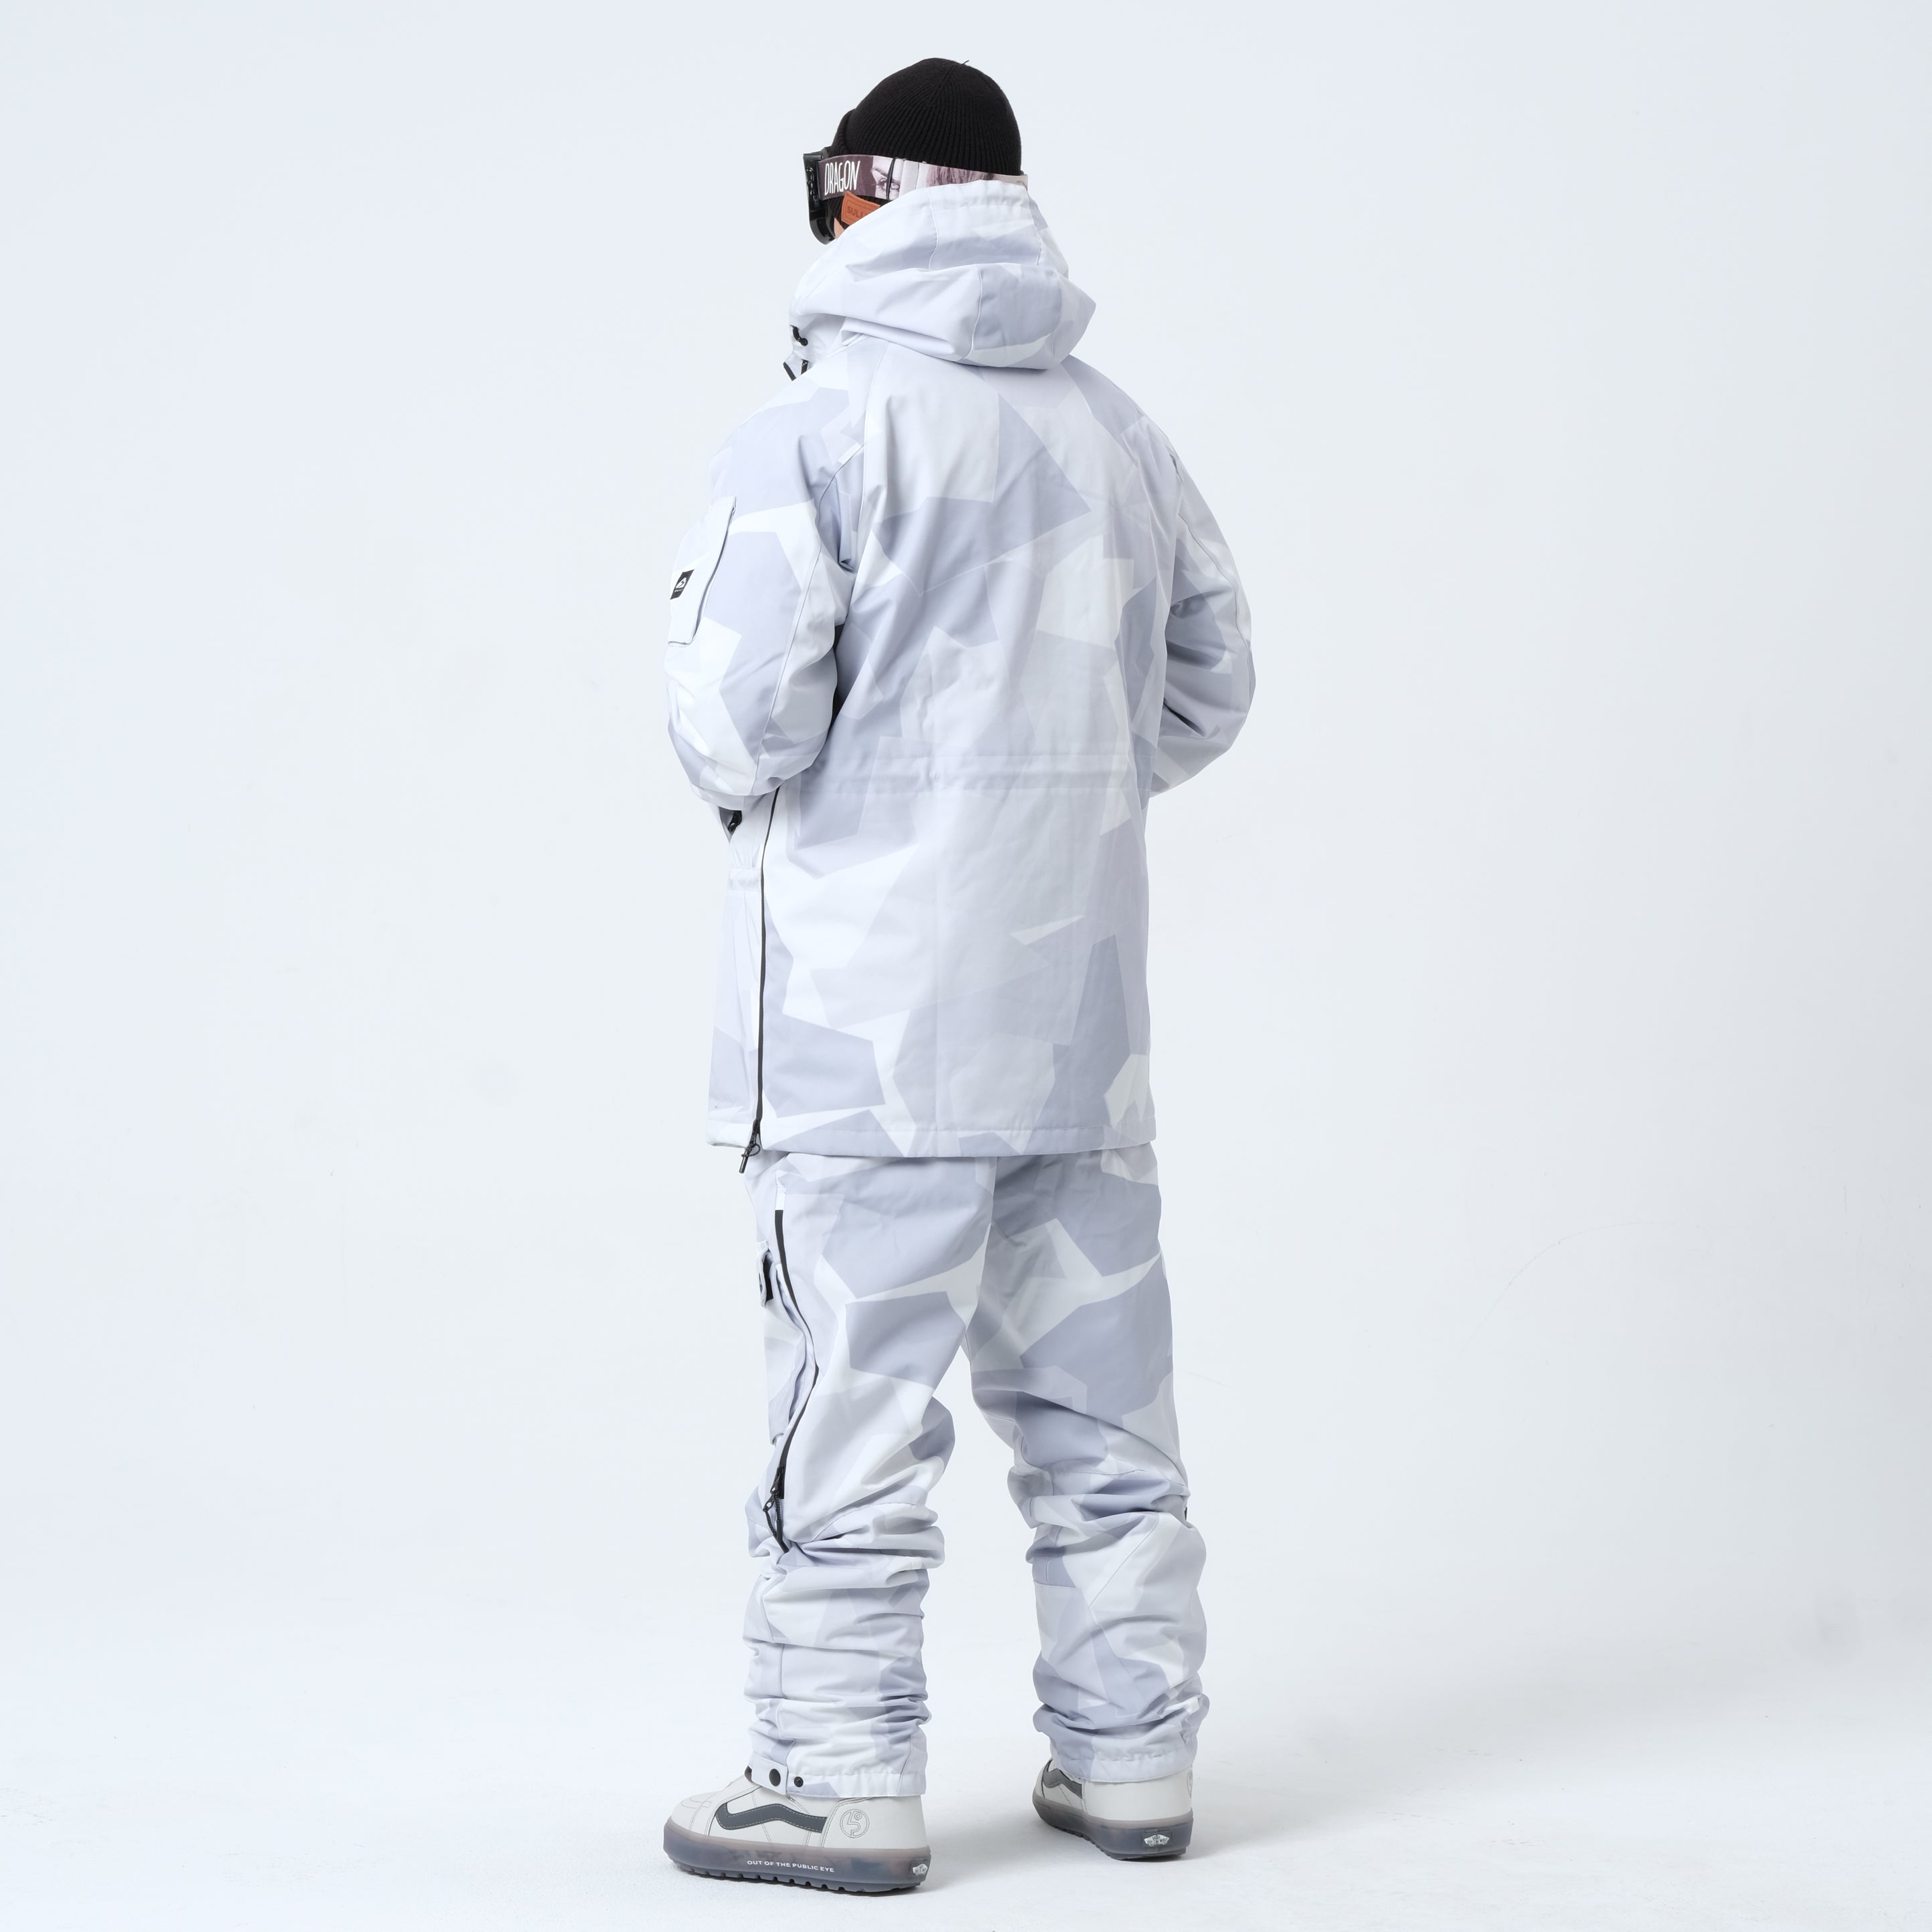 THE NAVY WHİTE JACKET – SULLY SNOW WEAR